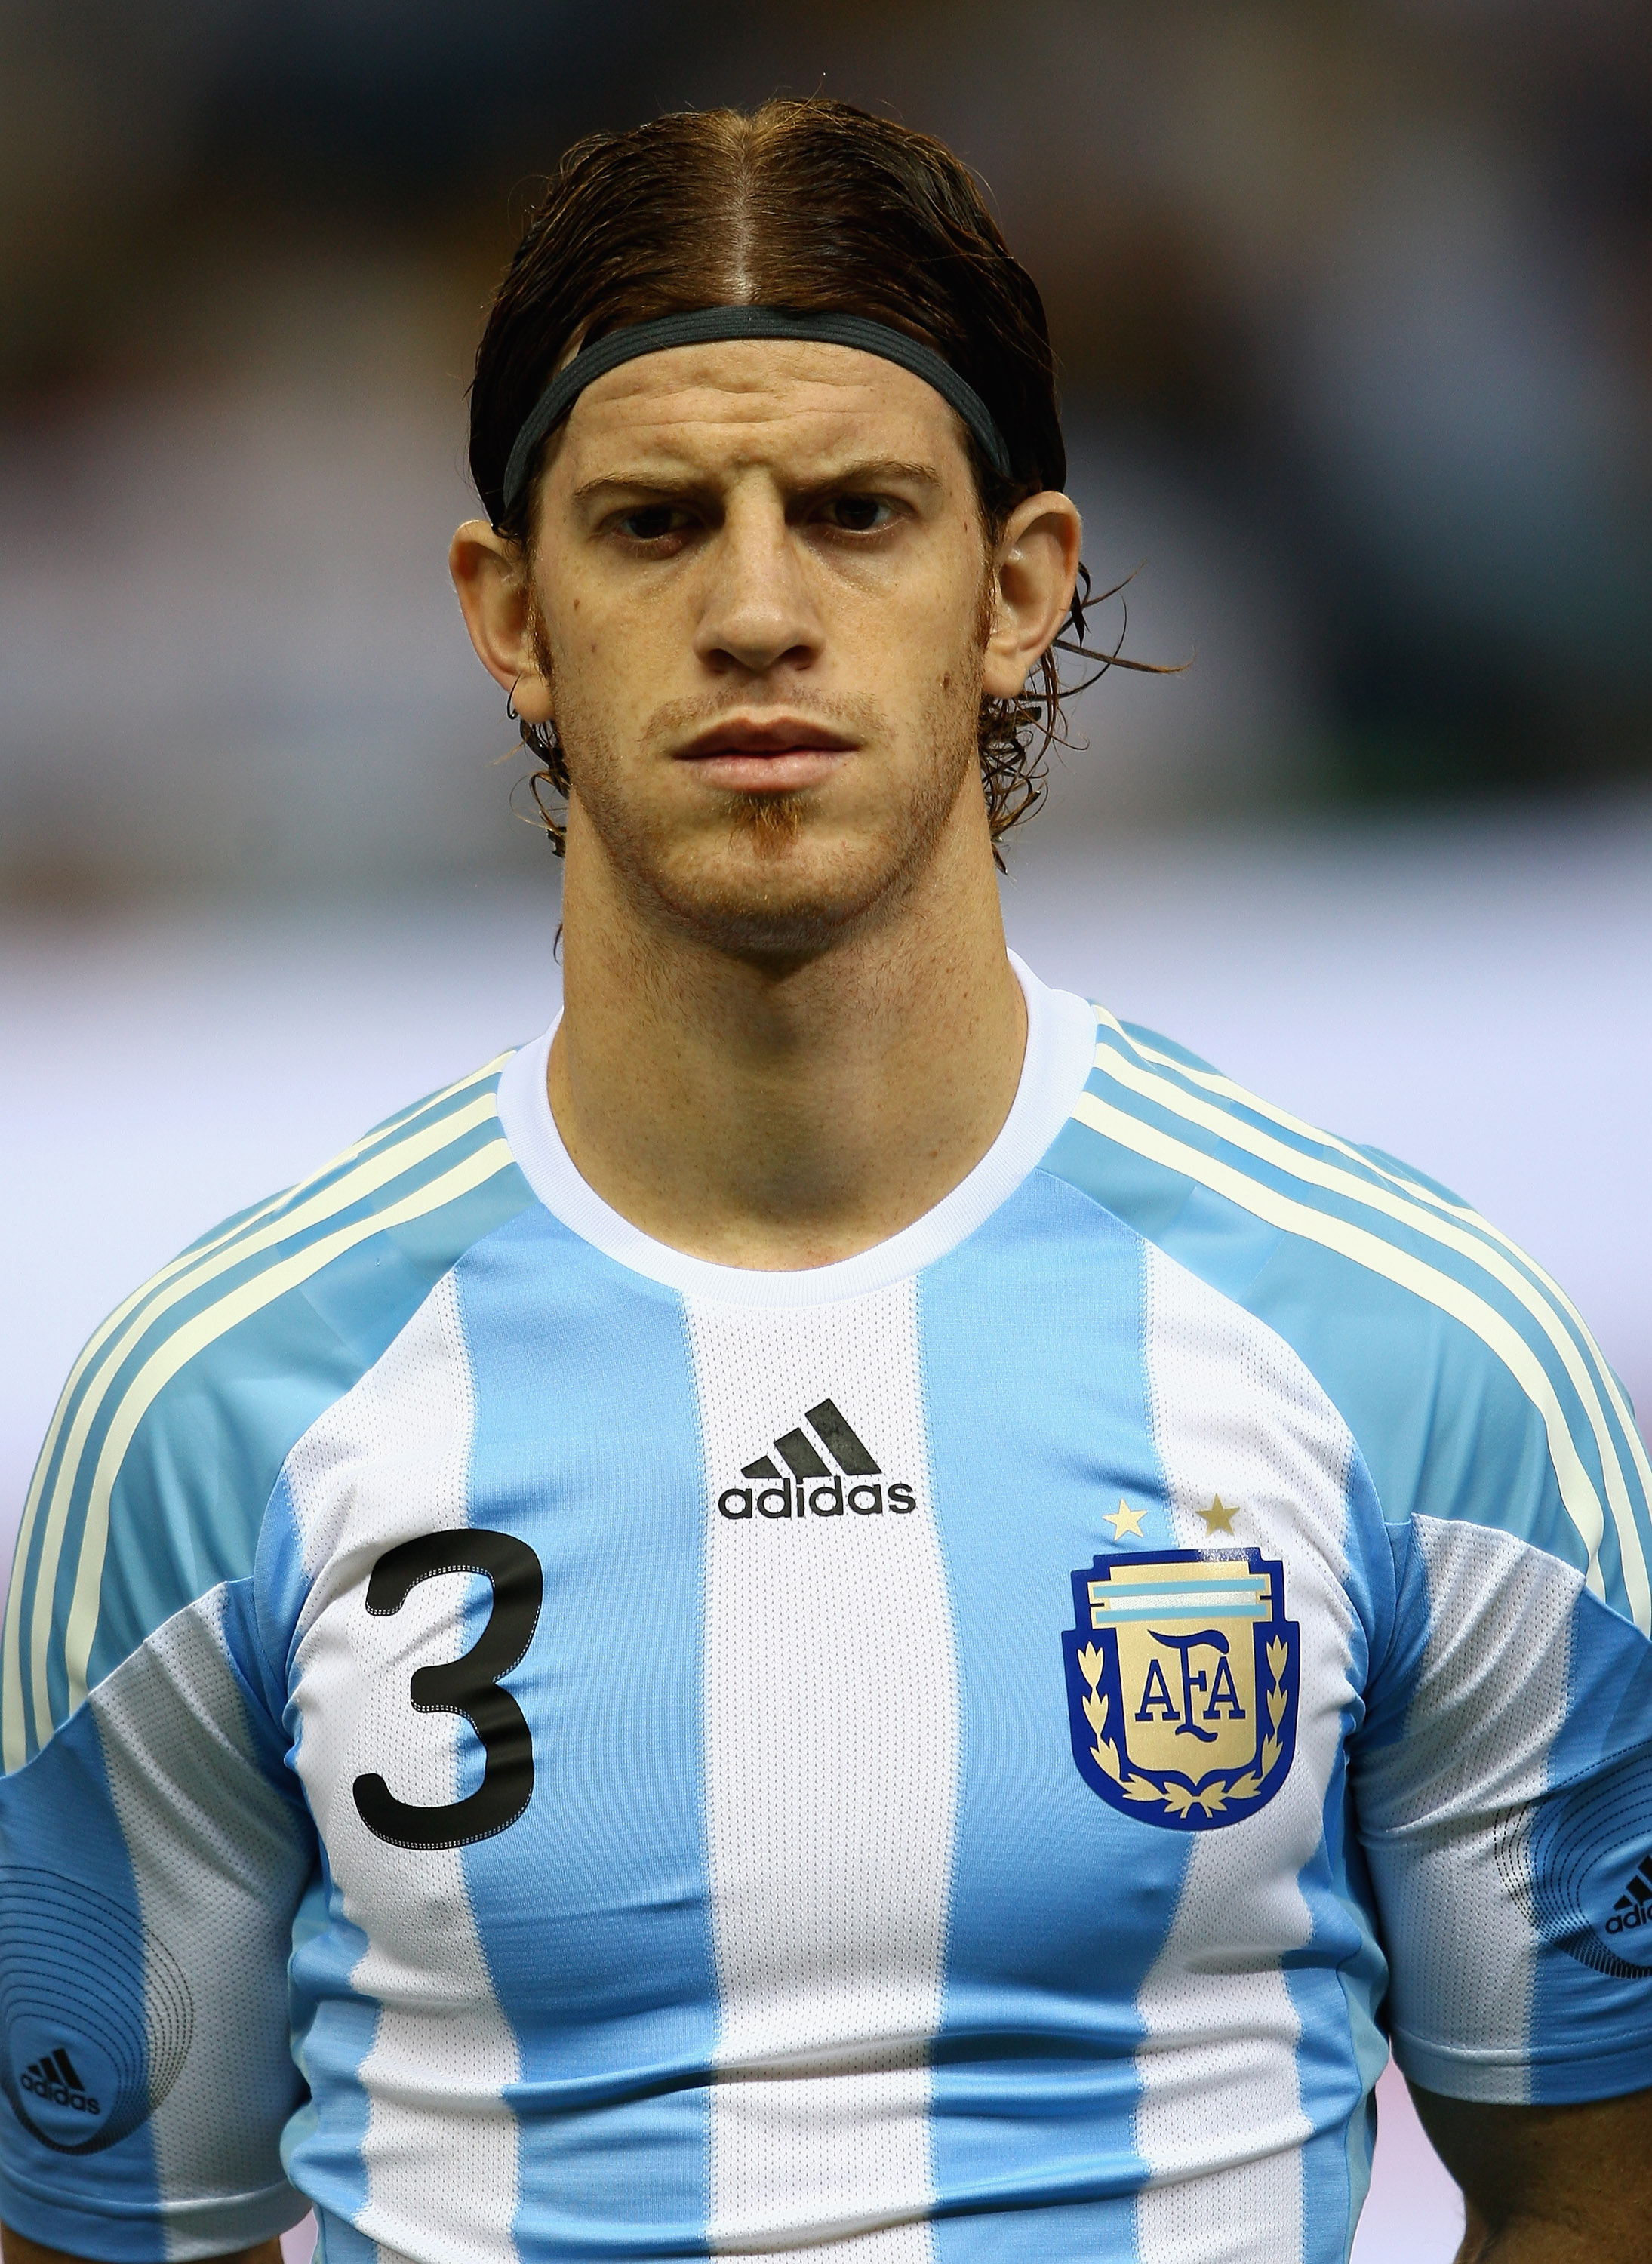 MADRID, SPAIN - NOVEMBER 14:  Cristian Ansaldi of Argentina during the friendly International football match Spain against Argentina at the Vicente Calderon stadium in Madrid, on November 14, 2009 in Madrid, Spain.  (Photo by Clive Brunskill/Getty Images)